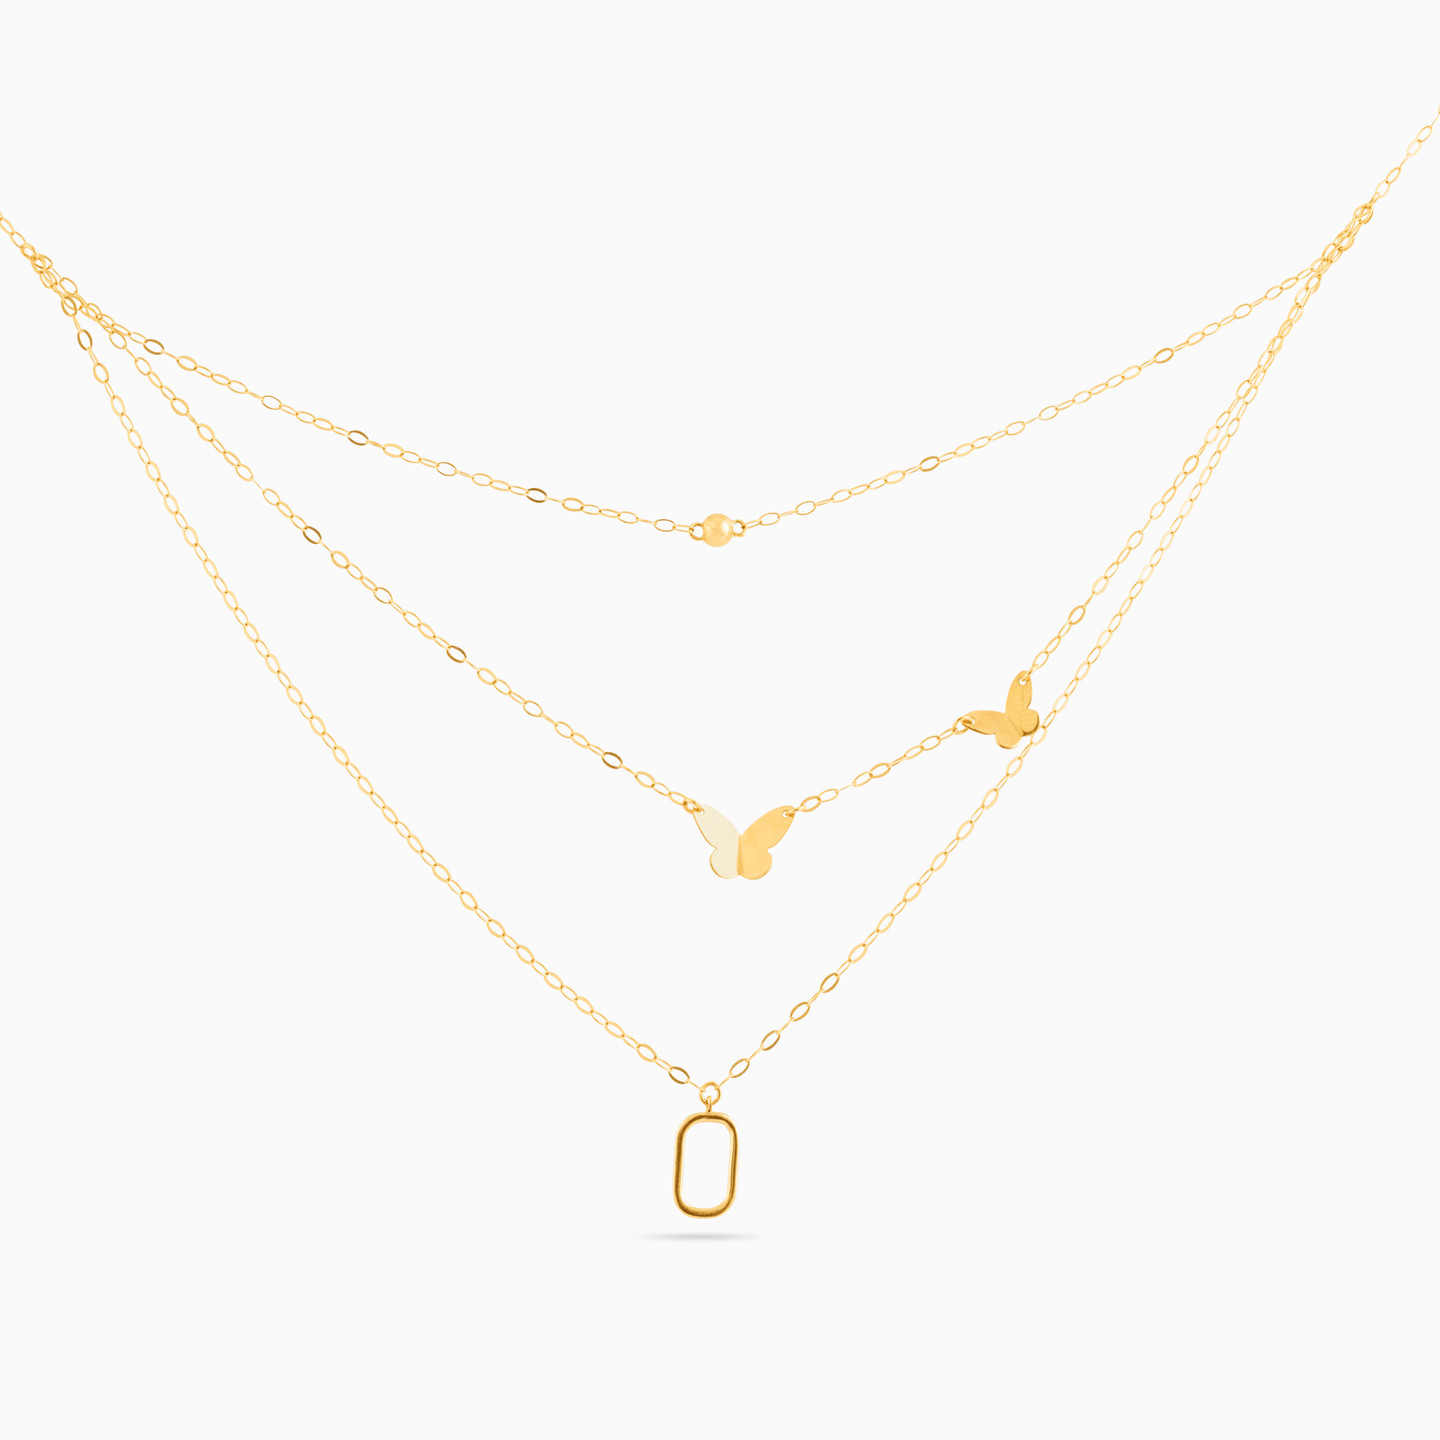 18K Gold Layered Necklace - 3